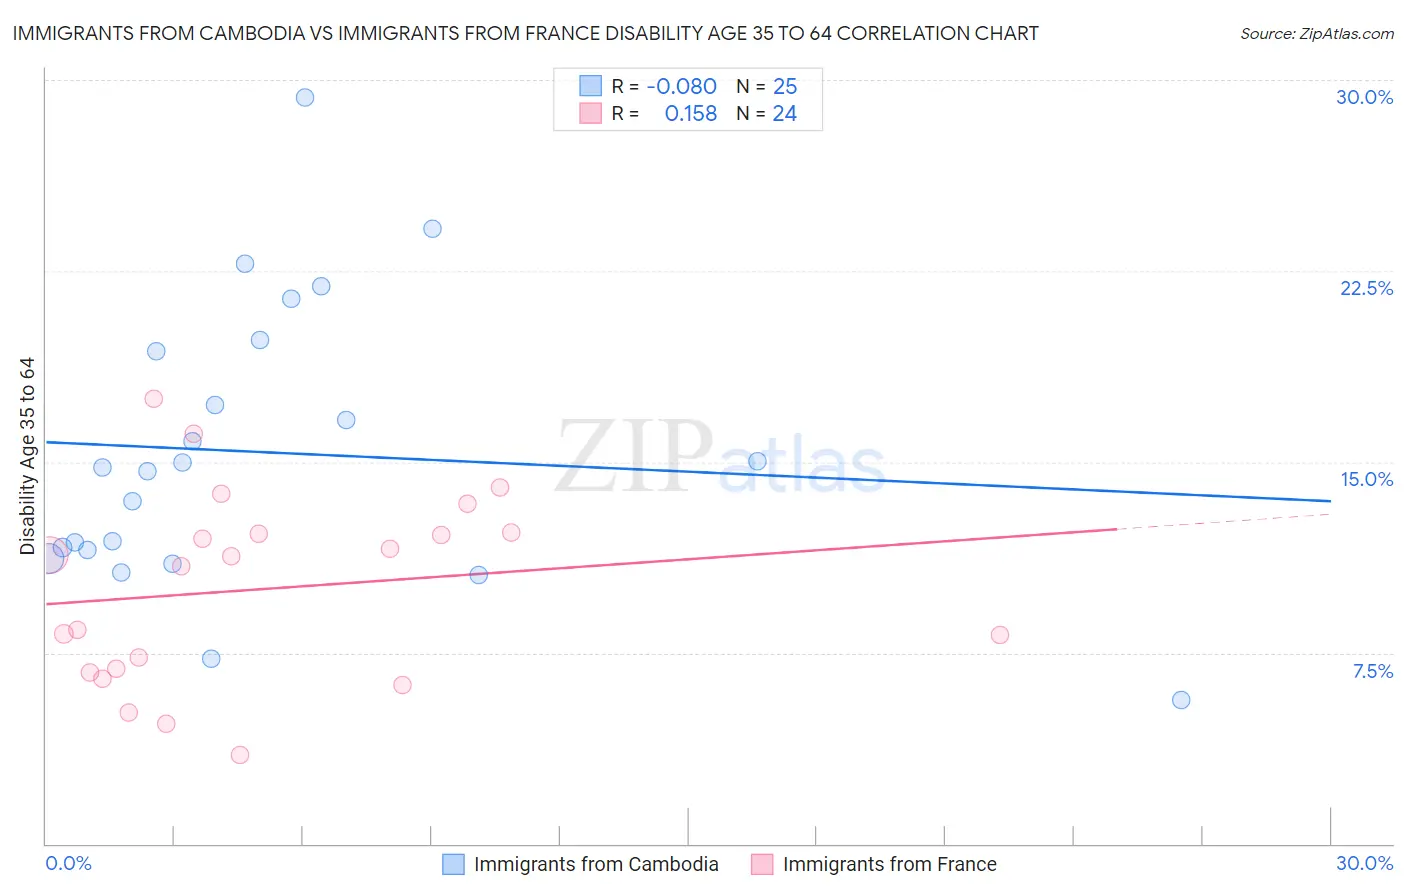 Immigrants from Cambodia vs Immigrants from France Disability Age 35 to 64